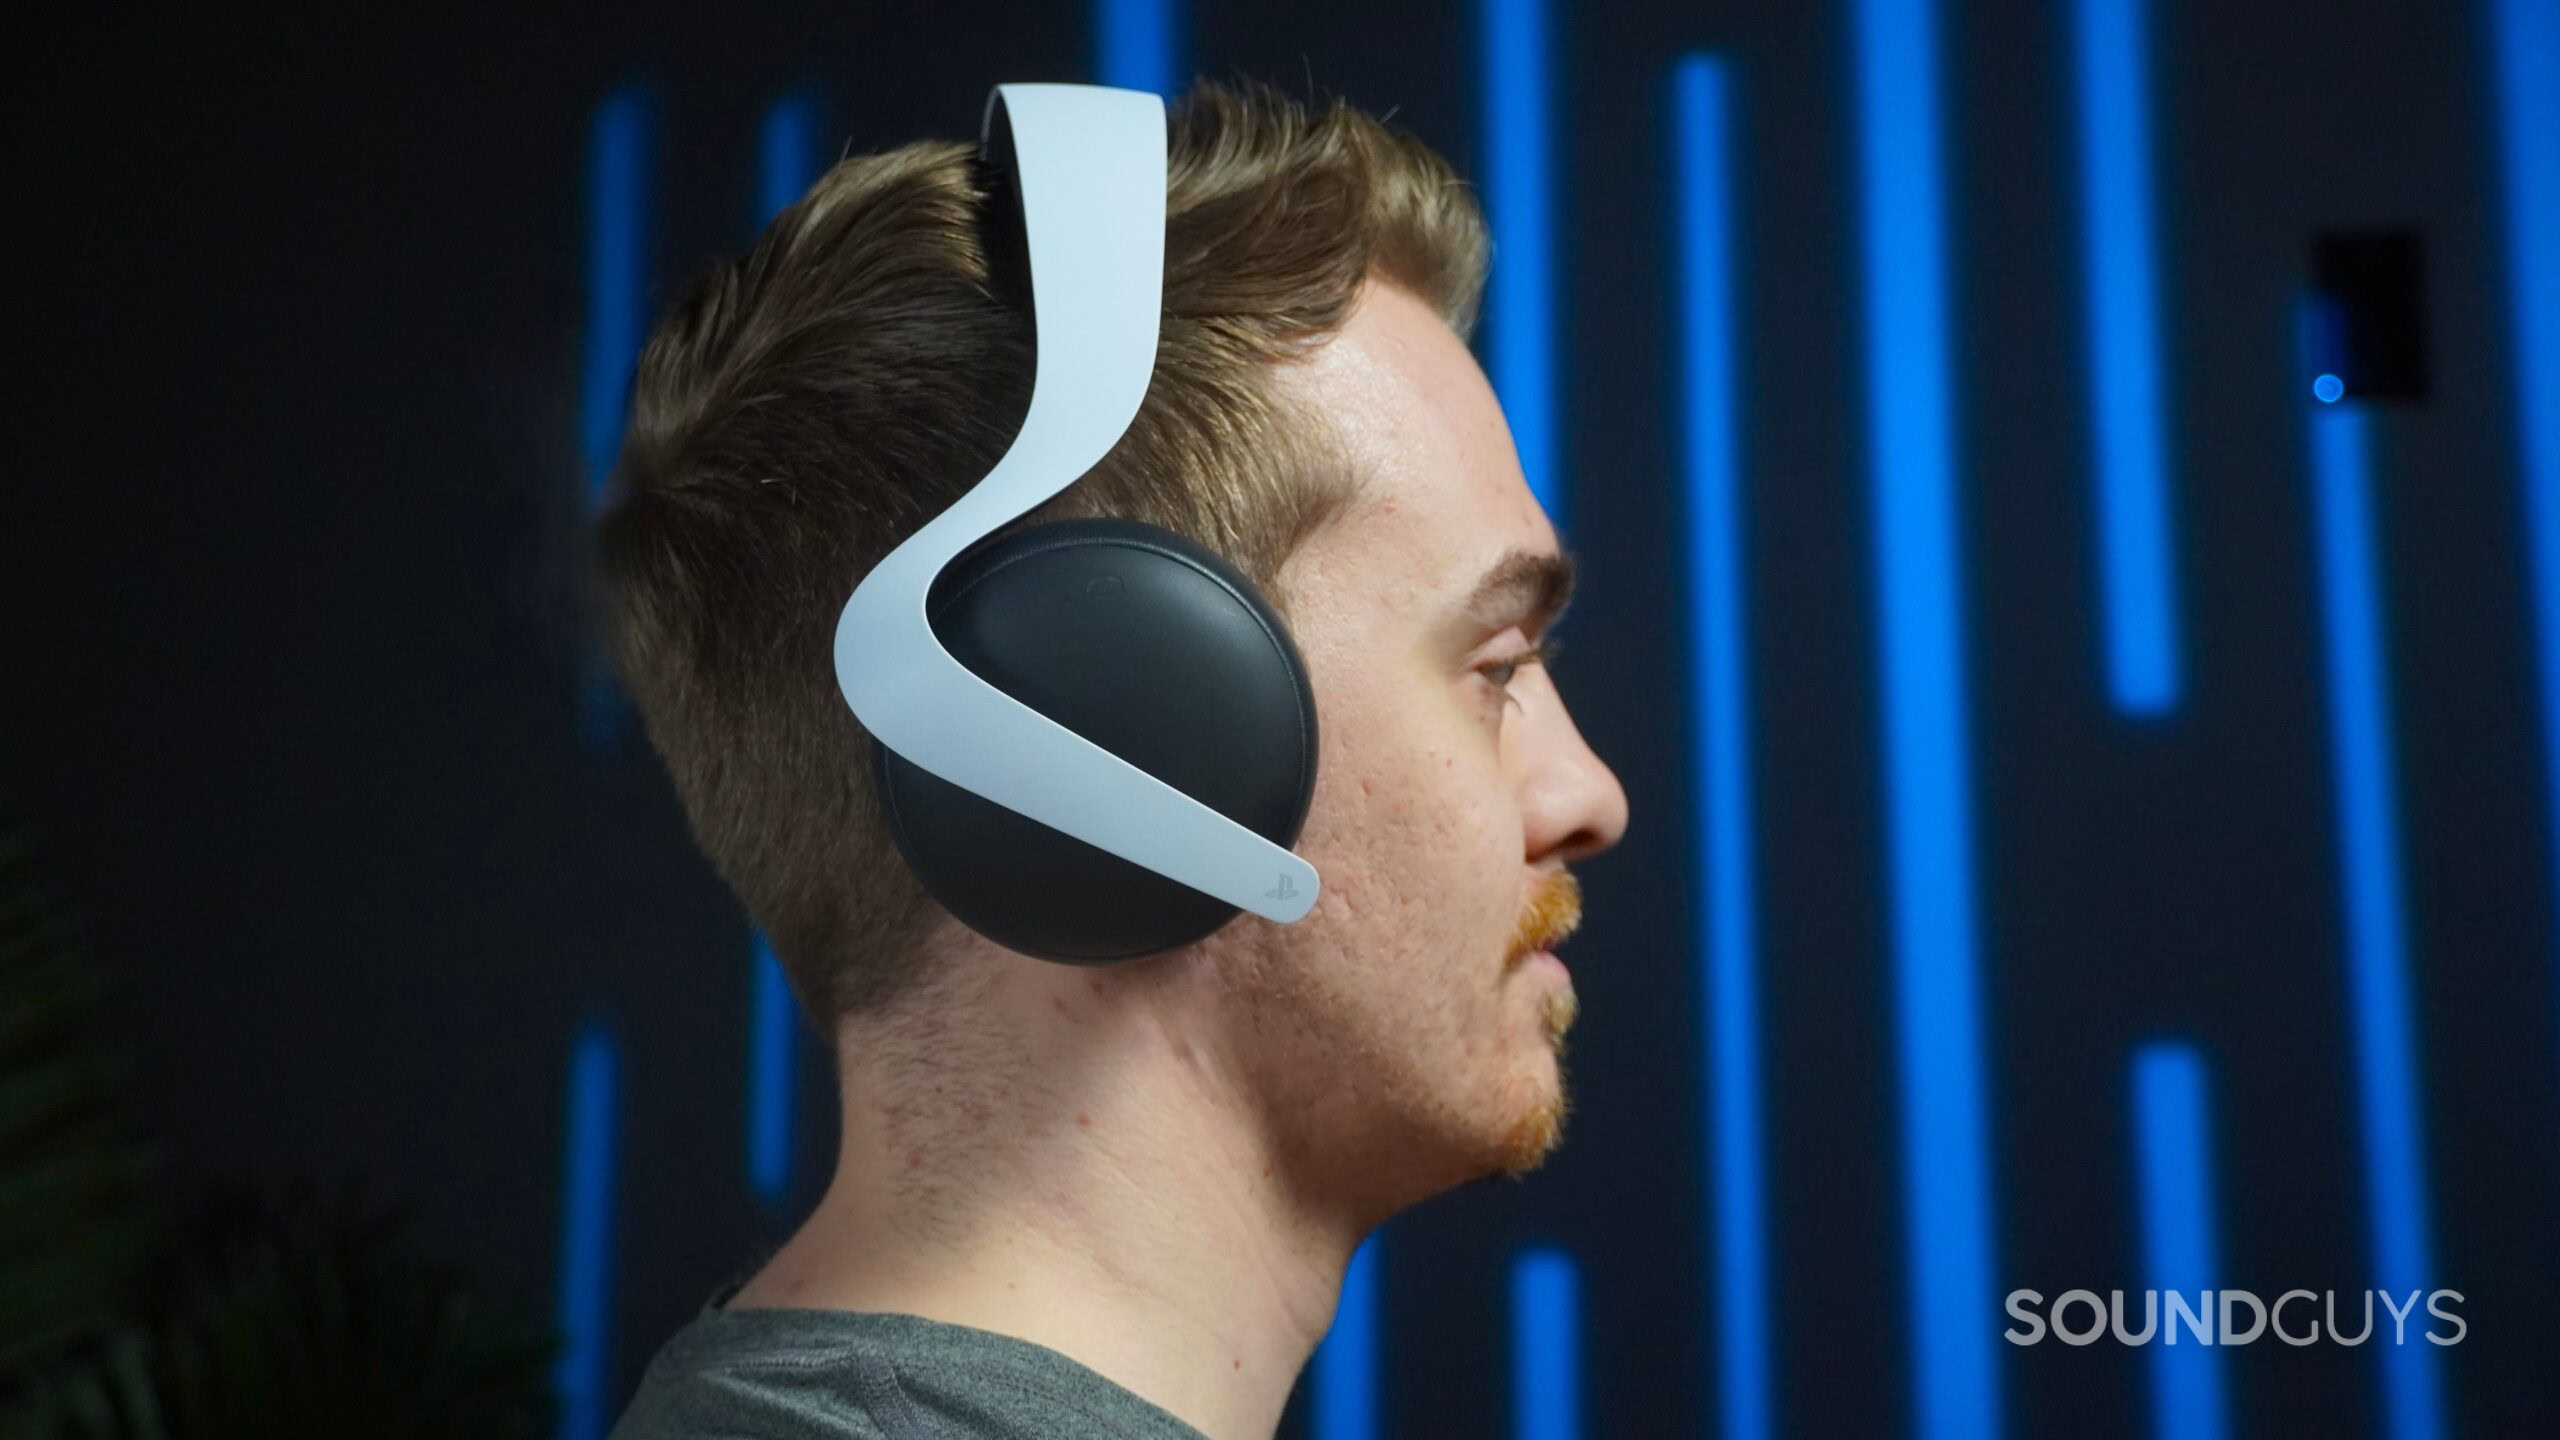 Profile of a man wearing the PlayStation Pulse Elite headset